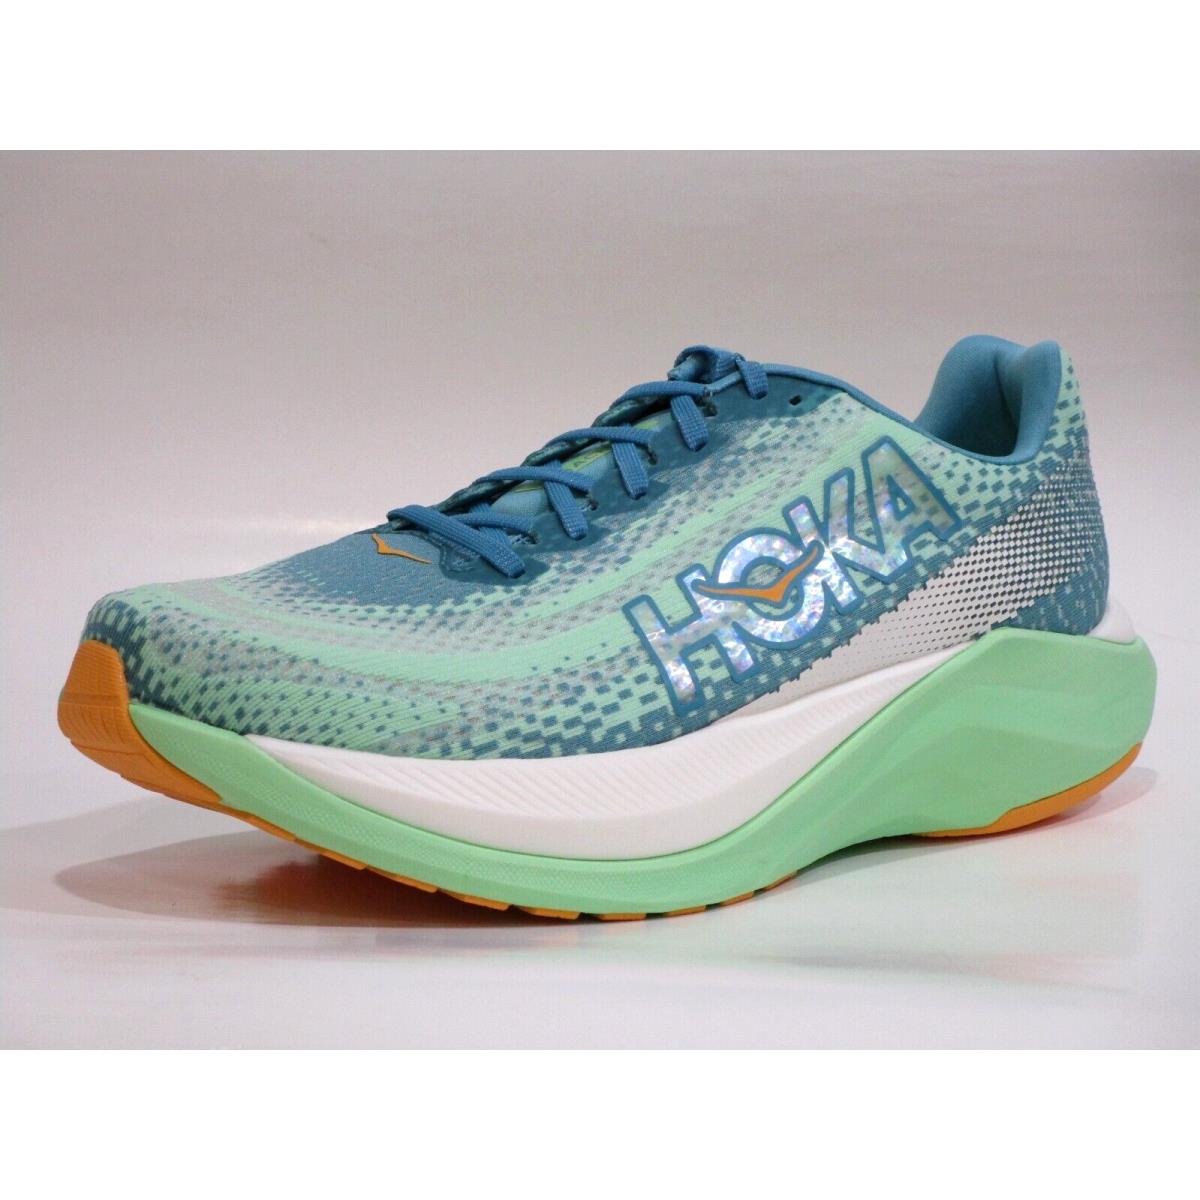 Hoka One One Men`s Mach X Running Sneaker Shoes Size 12 D M US